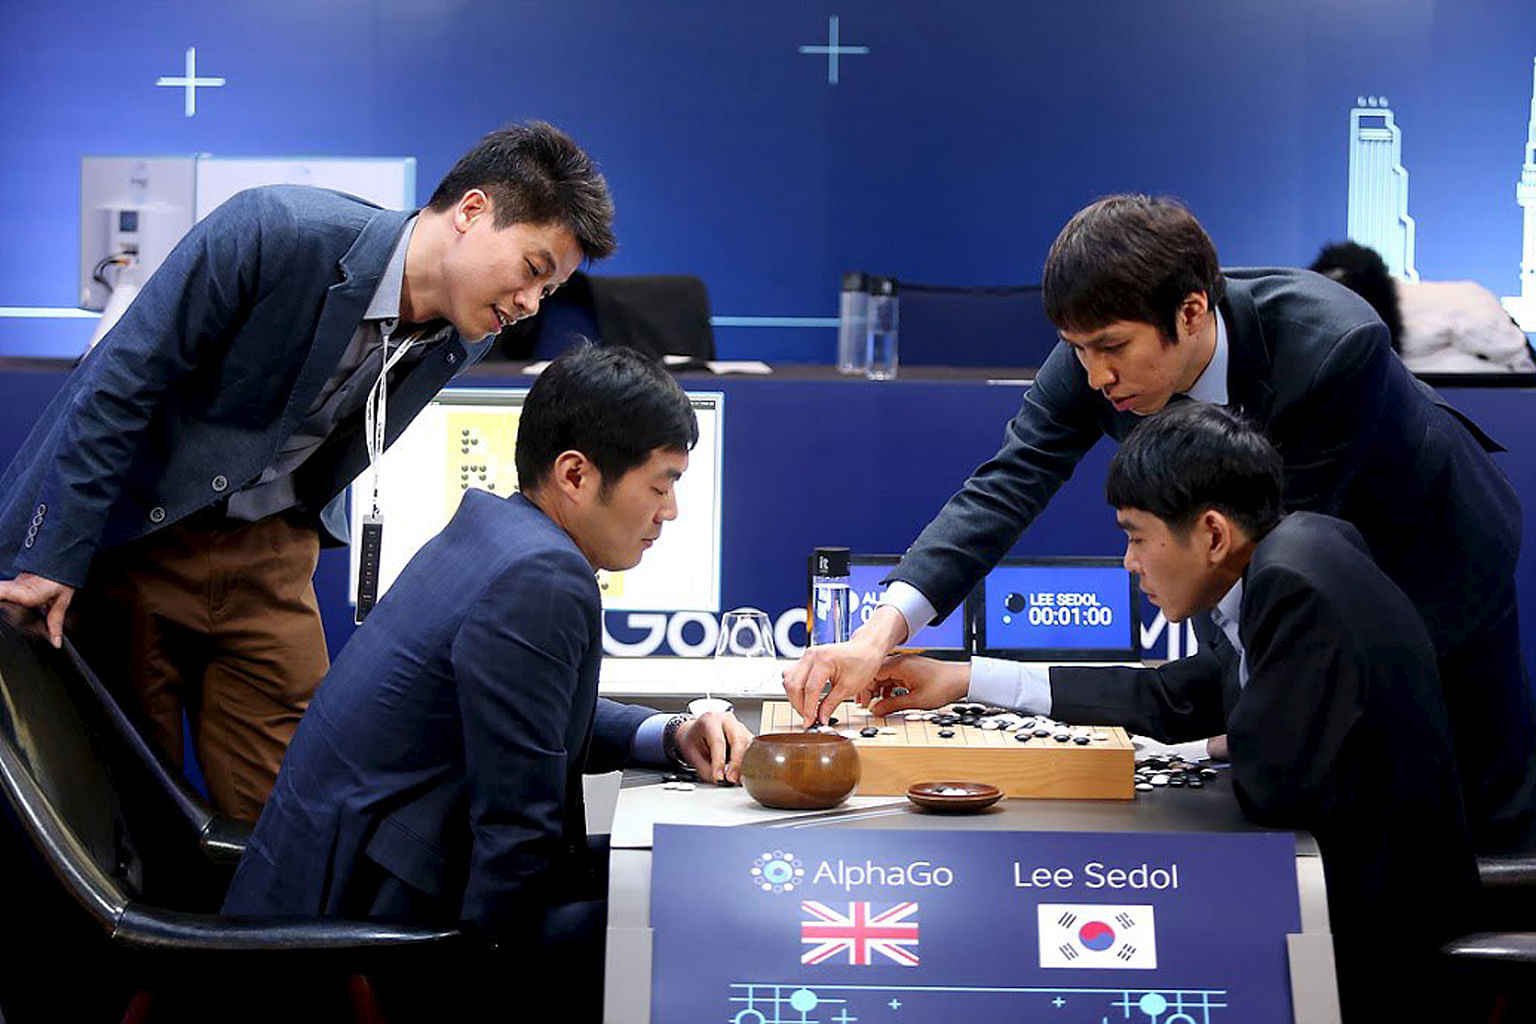 The world's top Go player, Mr Lee Sedol, reviewing his moves after the third match of the Google DeepMind Challenge Match against Google's artificial intelligence program AlphaGo in Seoul in March. The match comprised five games, of which AlphaGo won